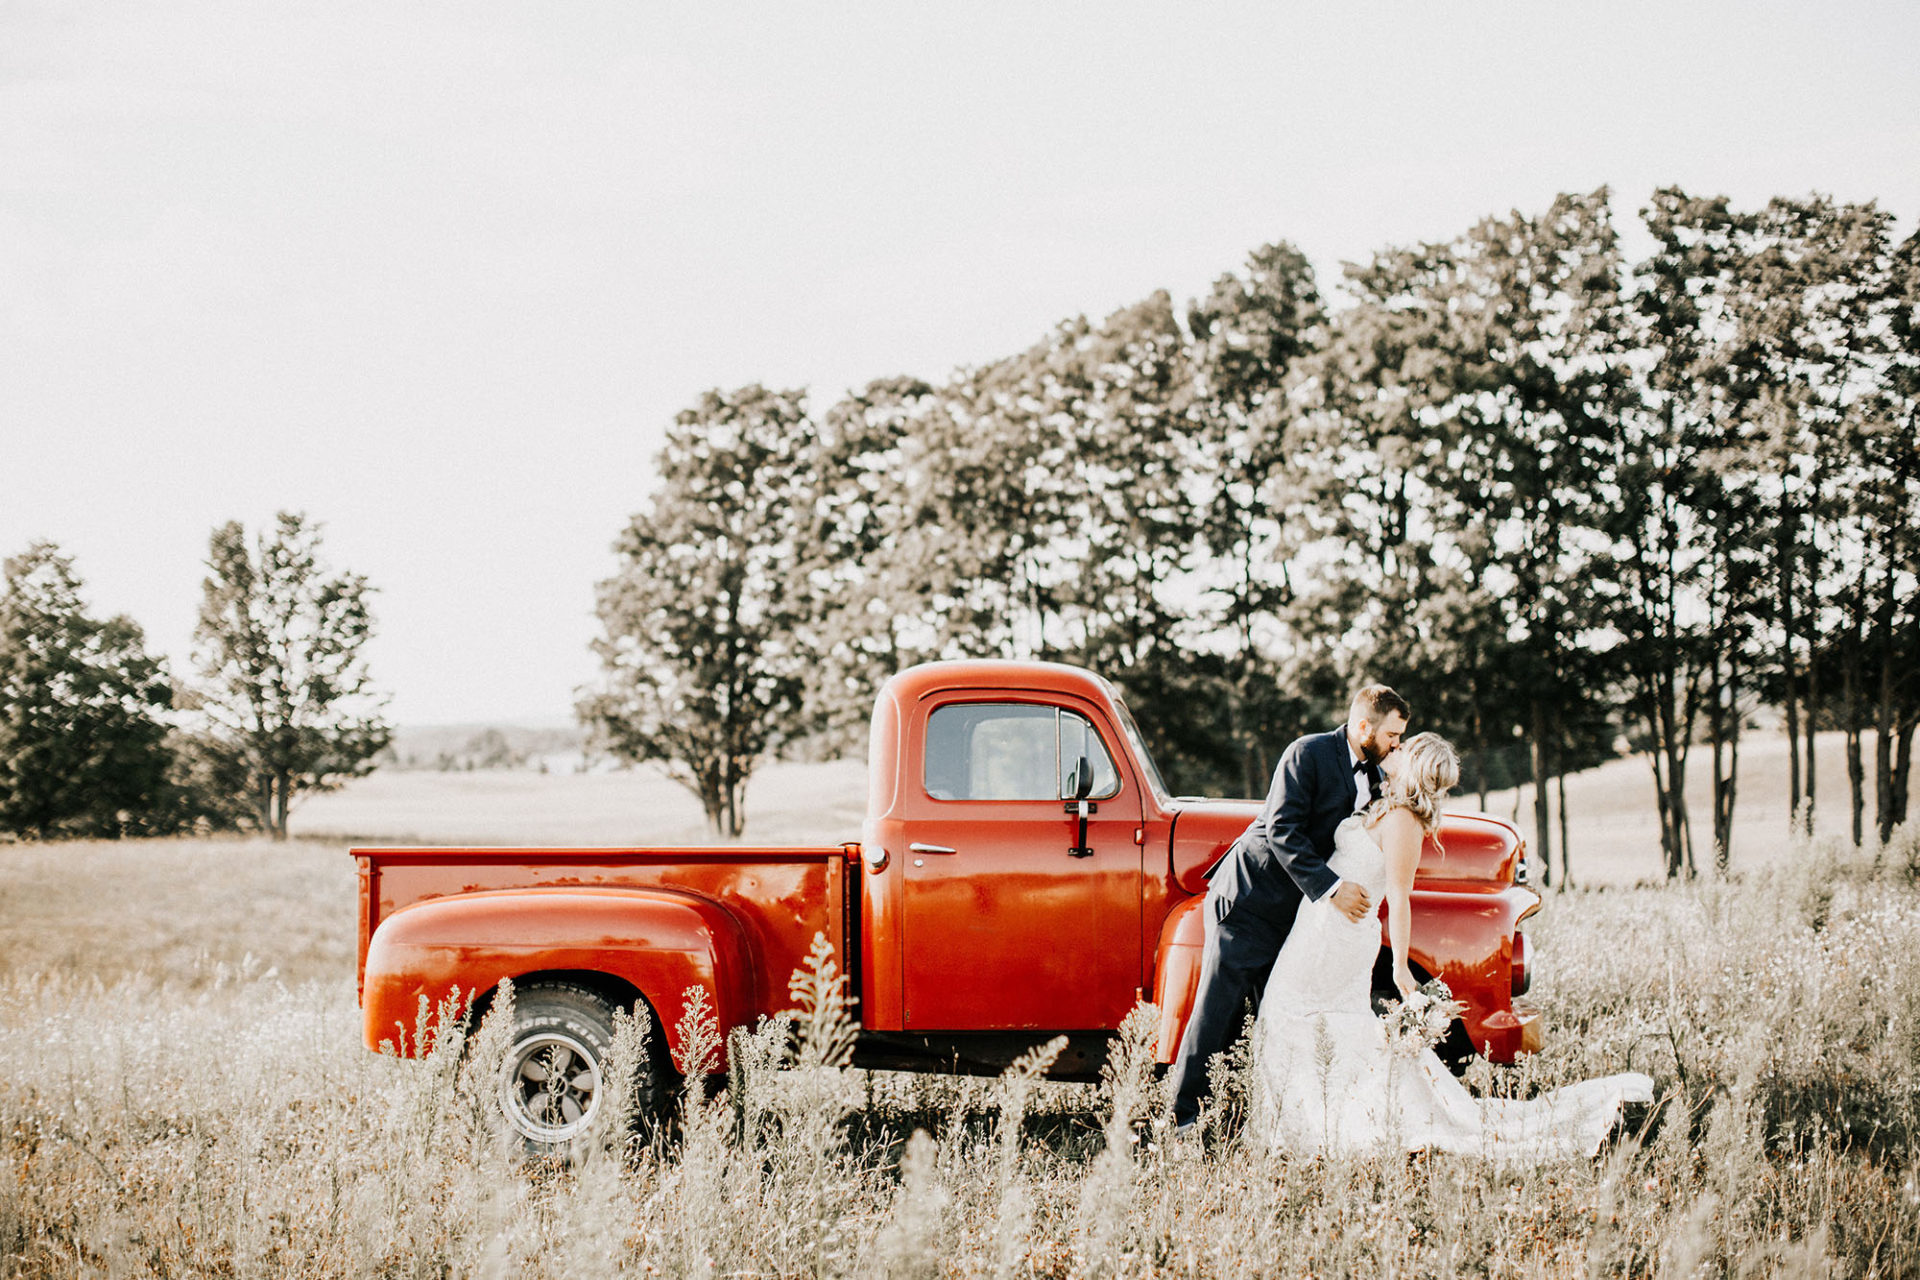 FAQ Sonshine Barn and the Red Truck Kiss